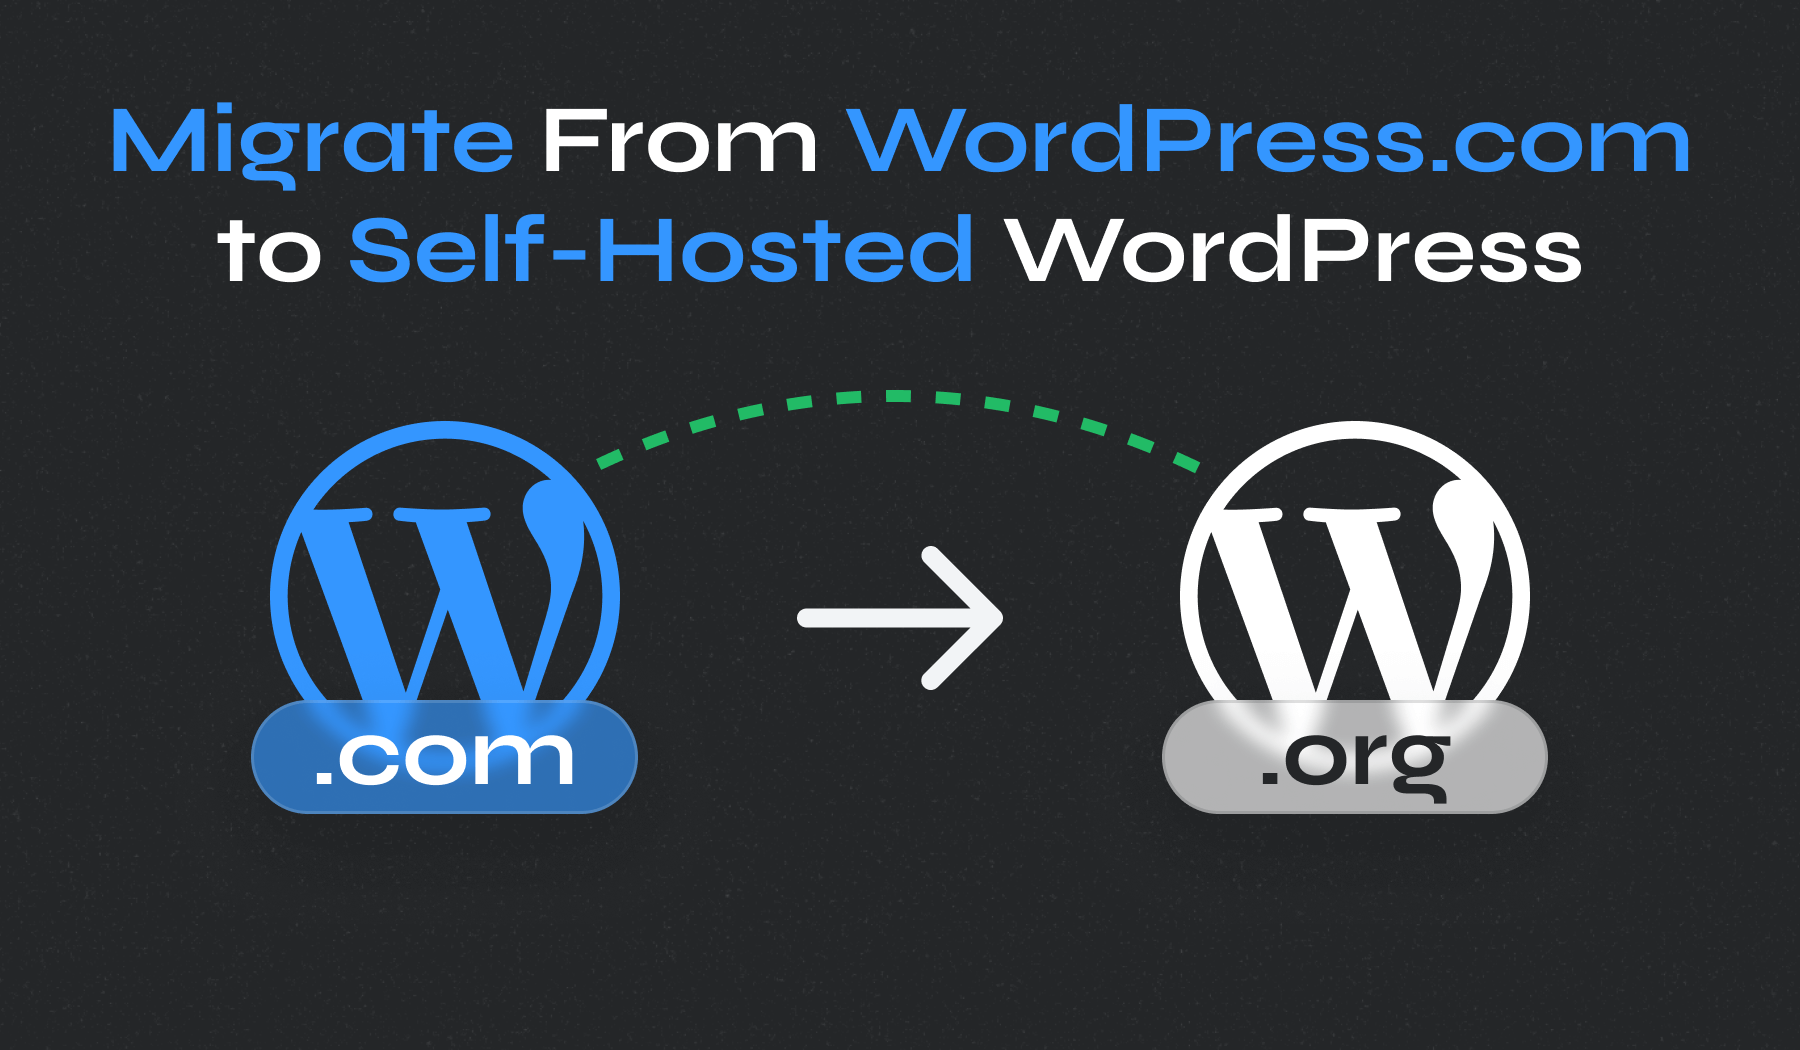 How to Move WordPress.com Site to Self-Hosted